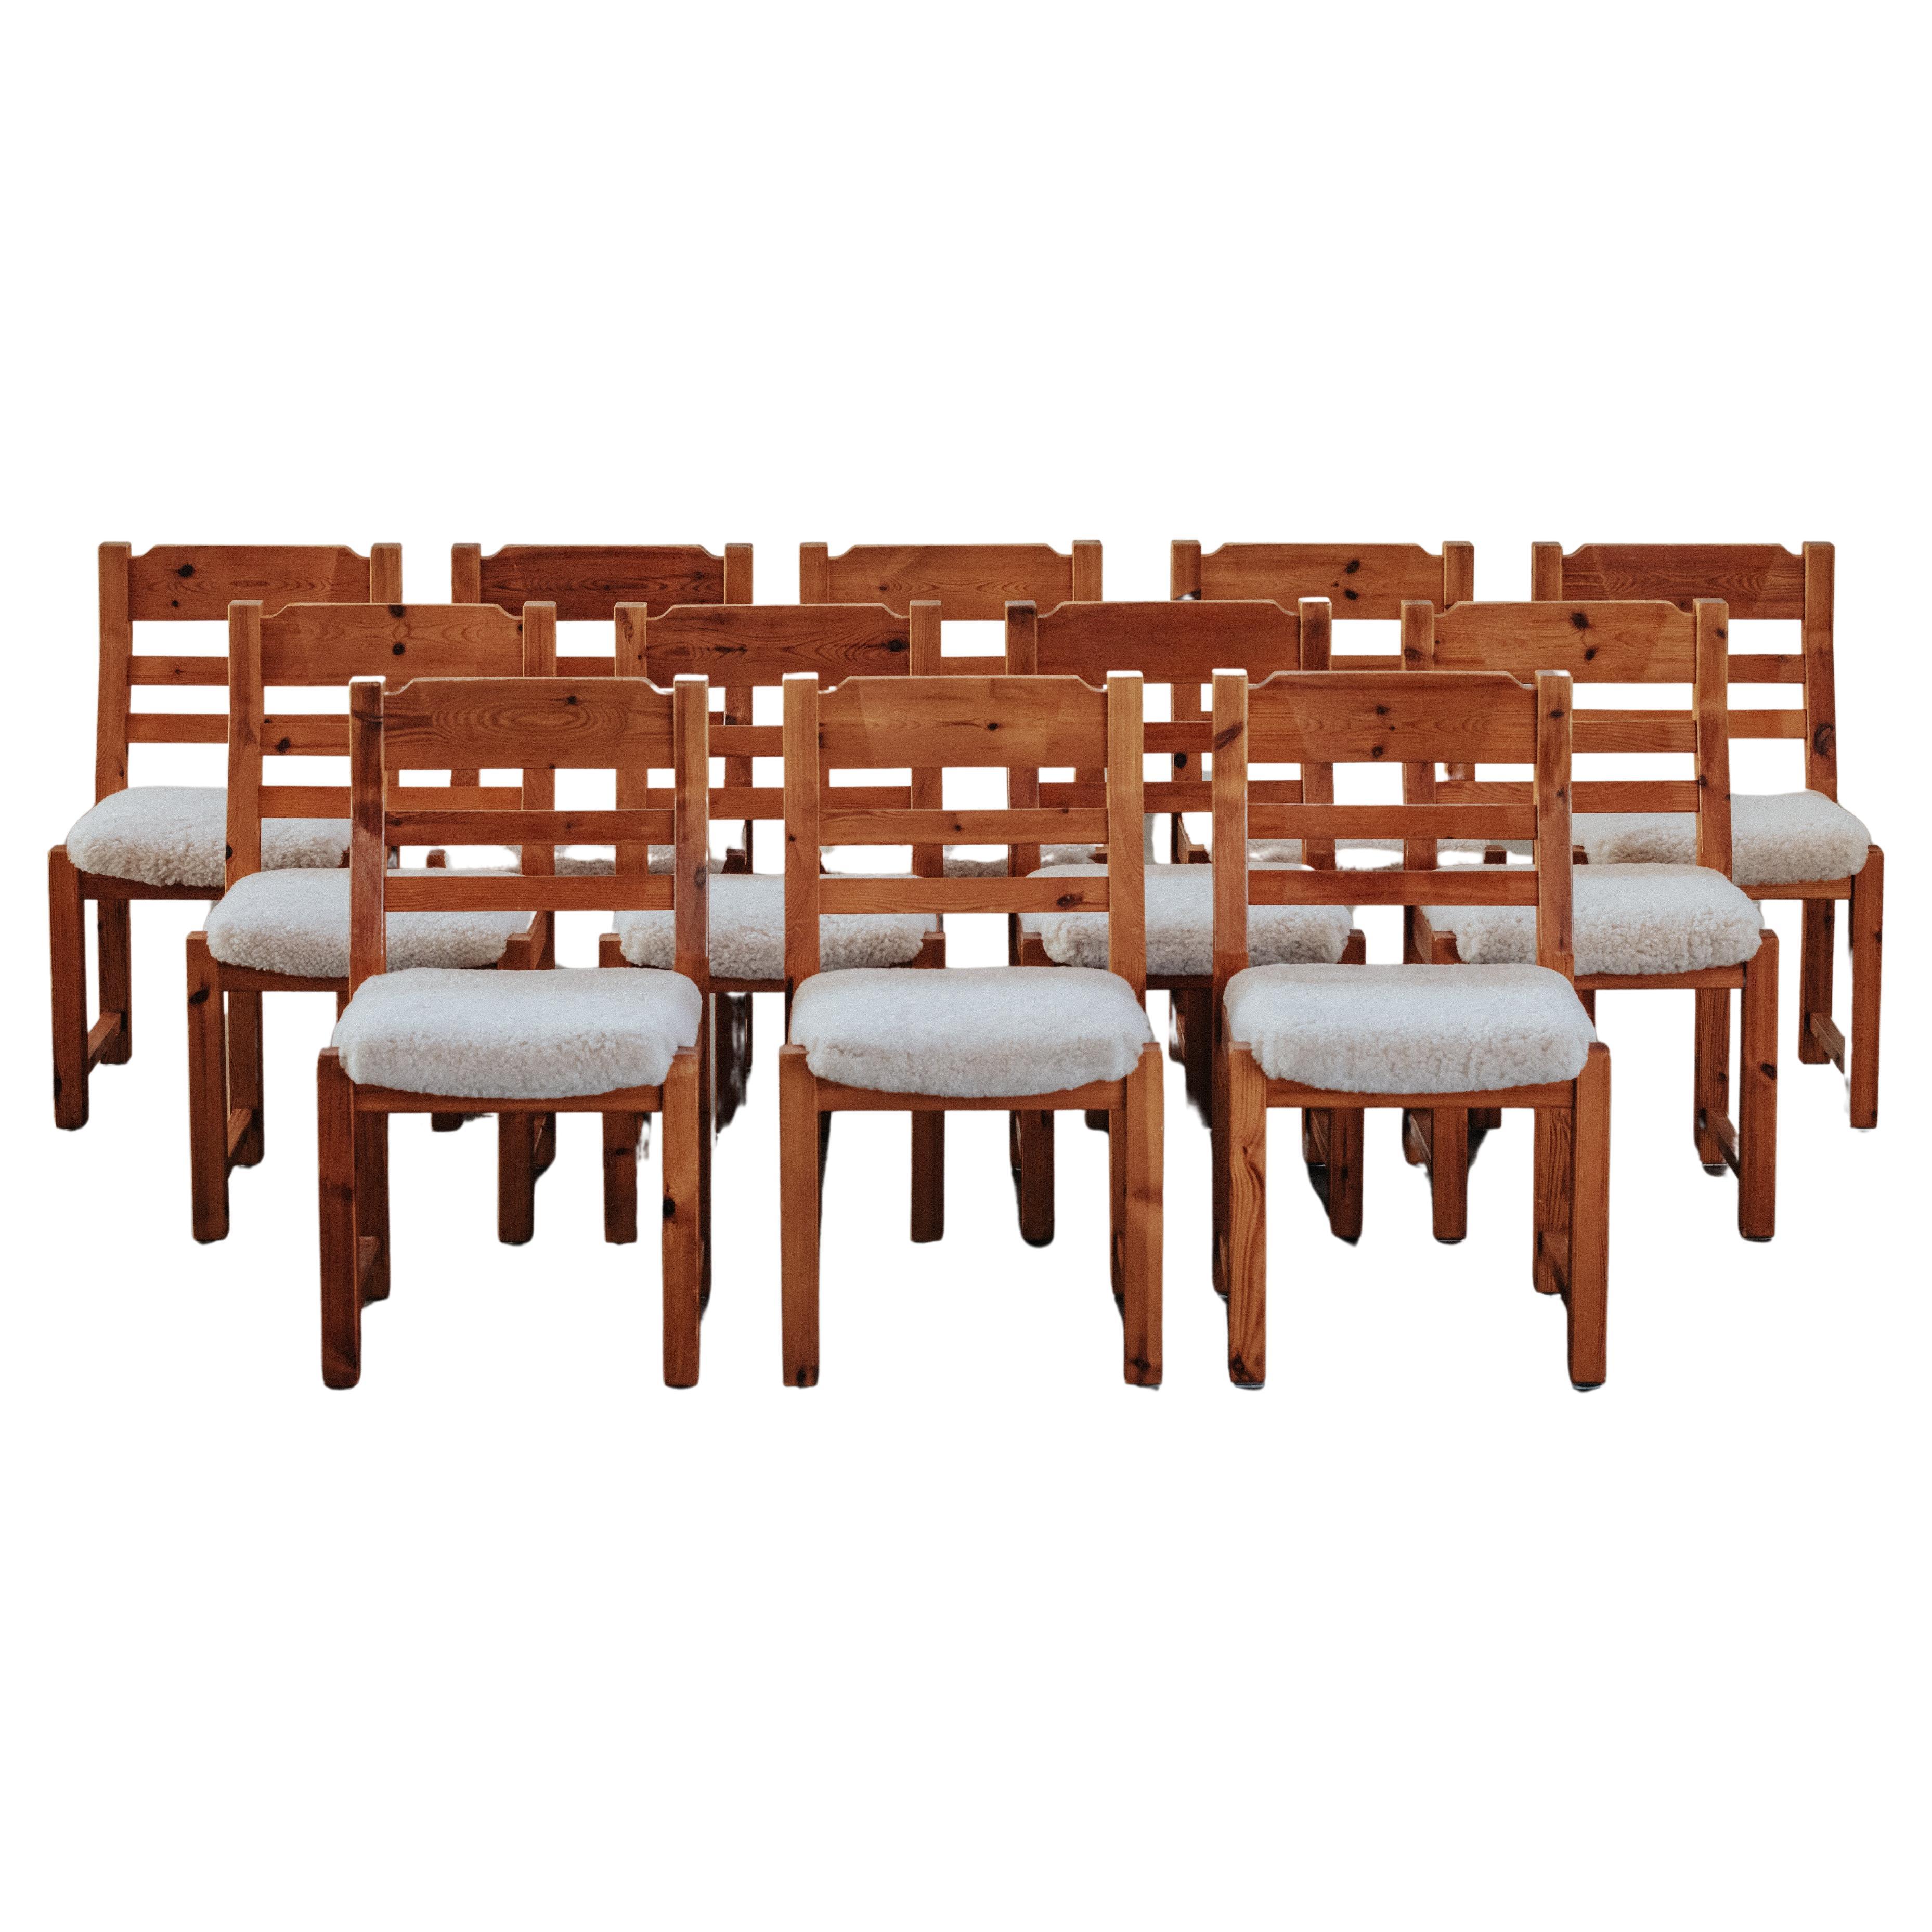 Large Set Of Twelve Sheepskin and Pine Dining Chairs From Denmark, Circa 1970 For Sale